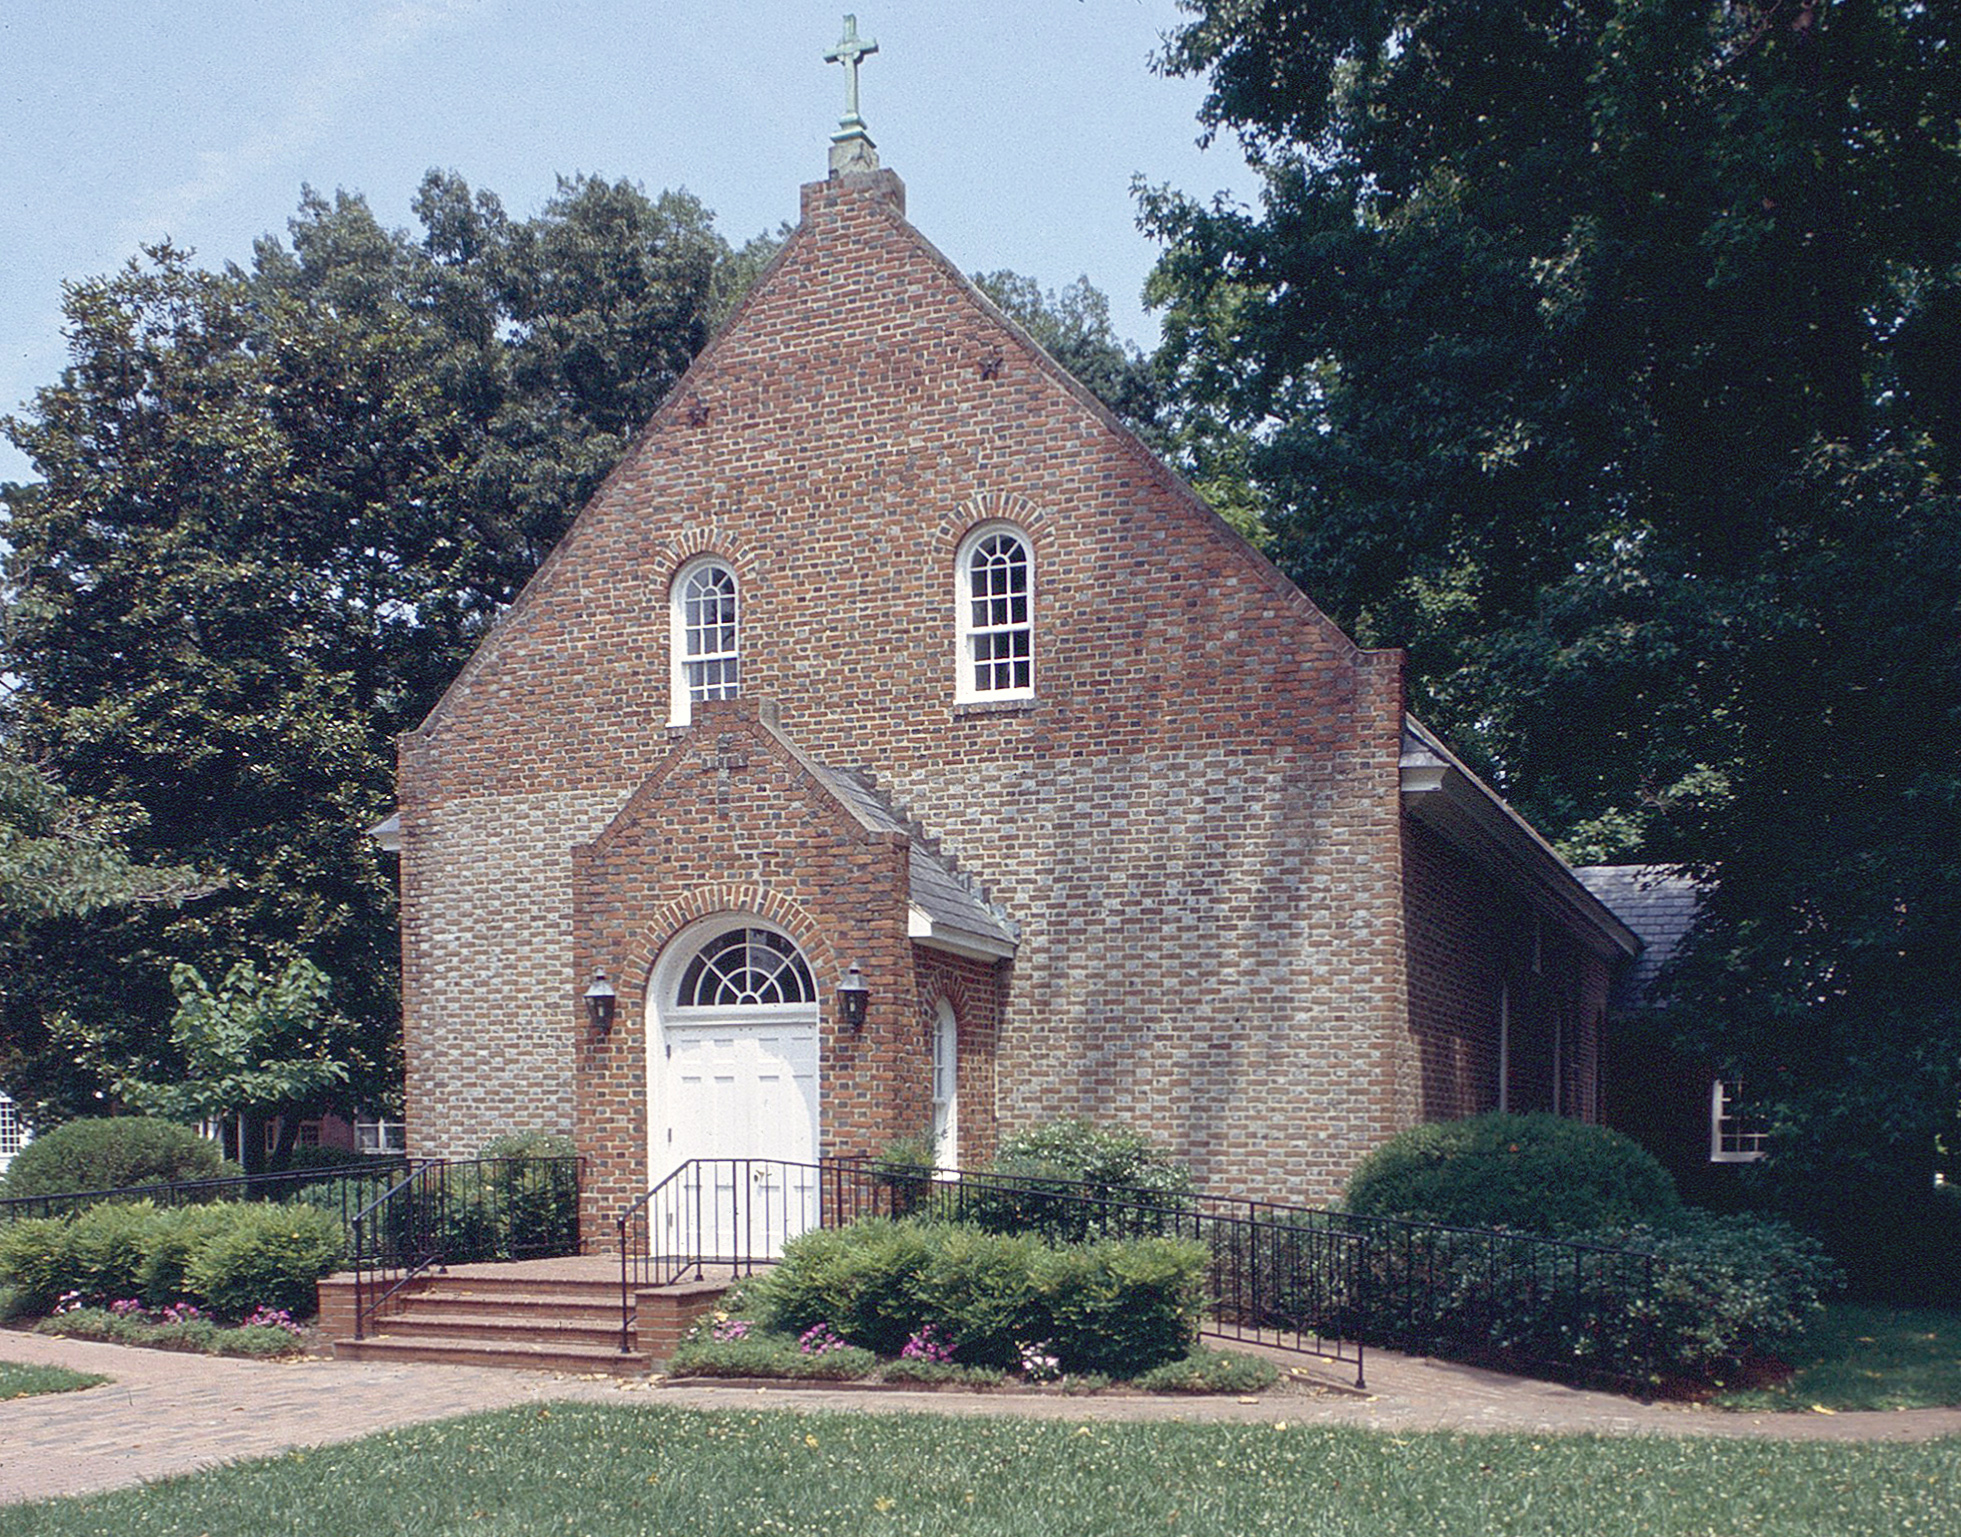 134-0025_Old_Donation_Church_2005_Ext_front_Elevation_VLR_Online